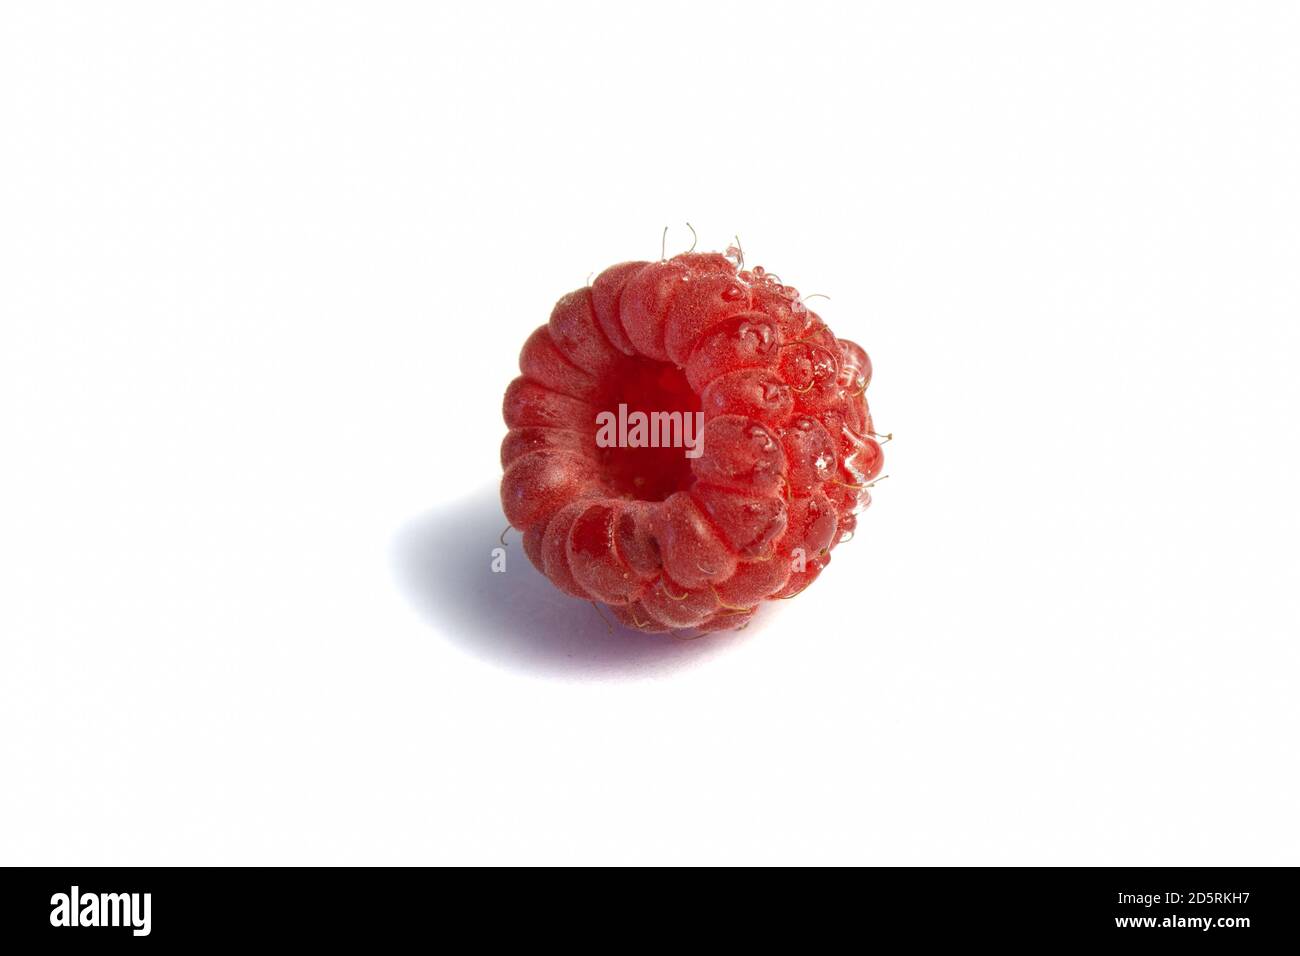 Ripe raspberry isolated on white background close-up. Fresh raspberries without sheets on a table with water droplets. Macro shooting. Healthy, wholes Stock Photo